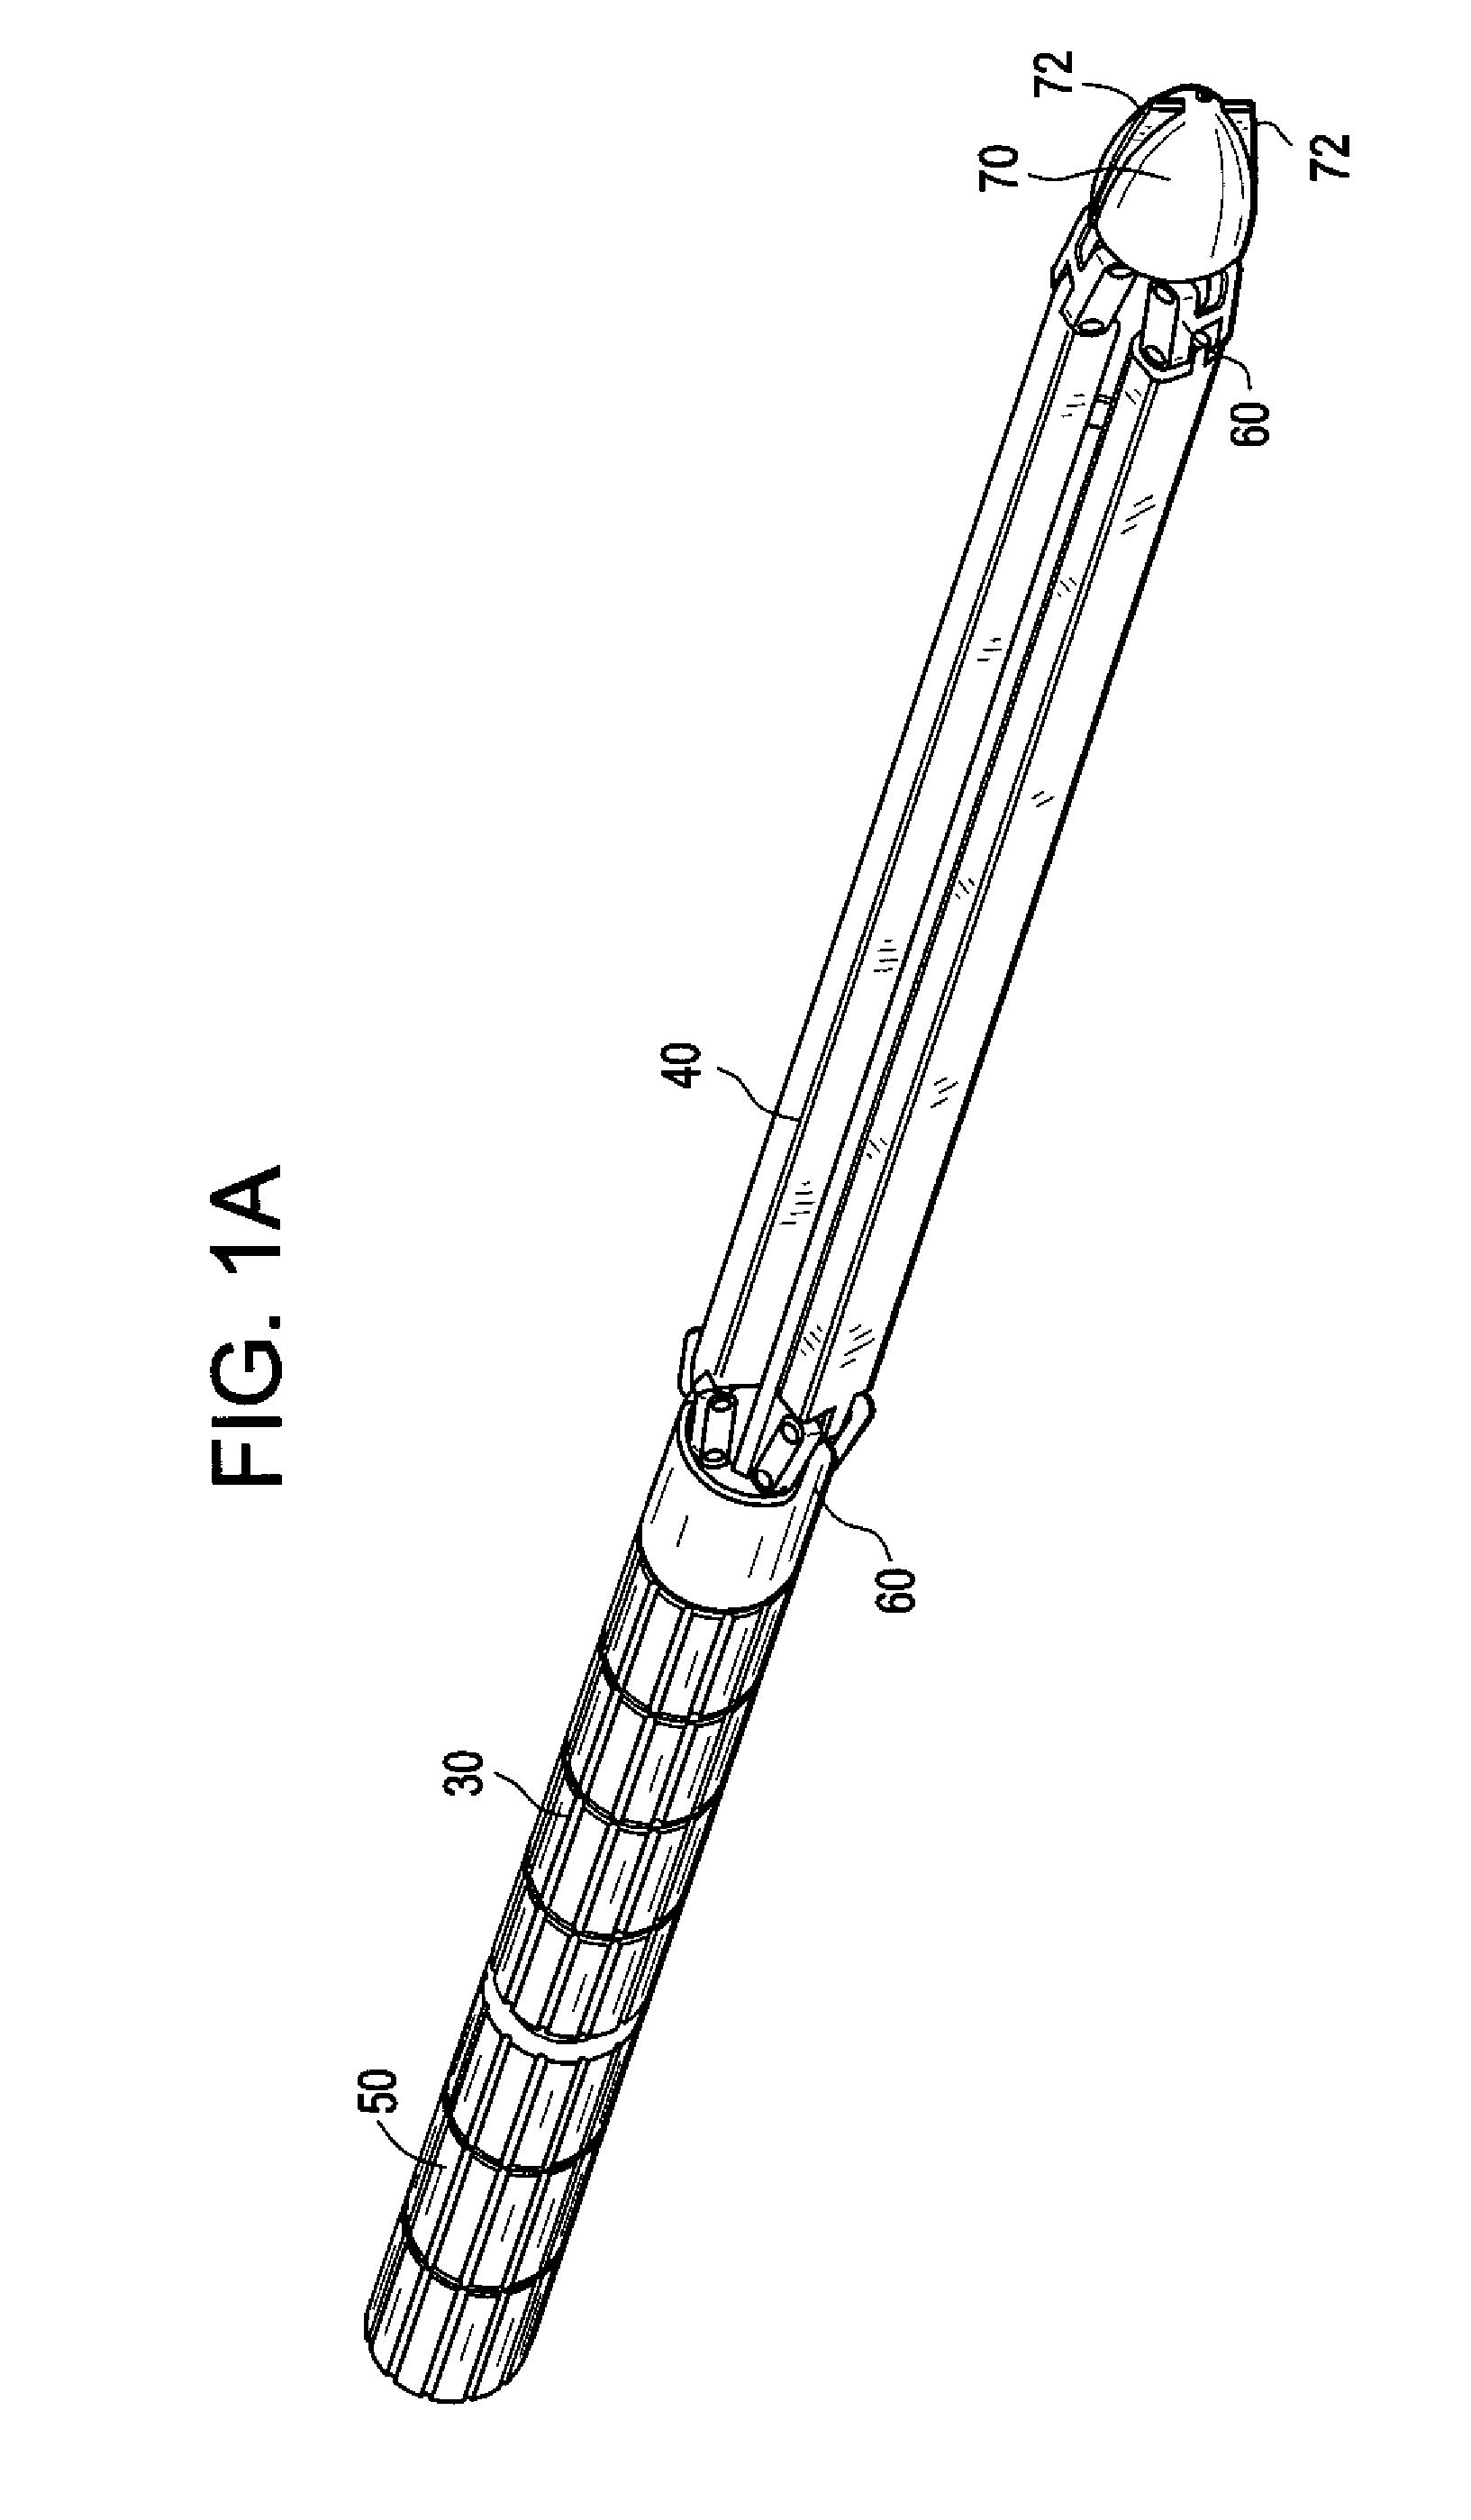 Minimally invasive tissue expander systems and methods